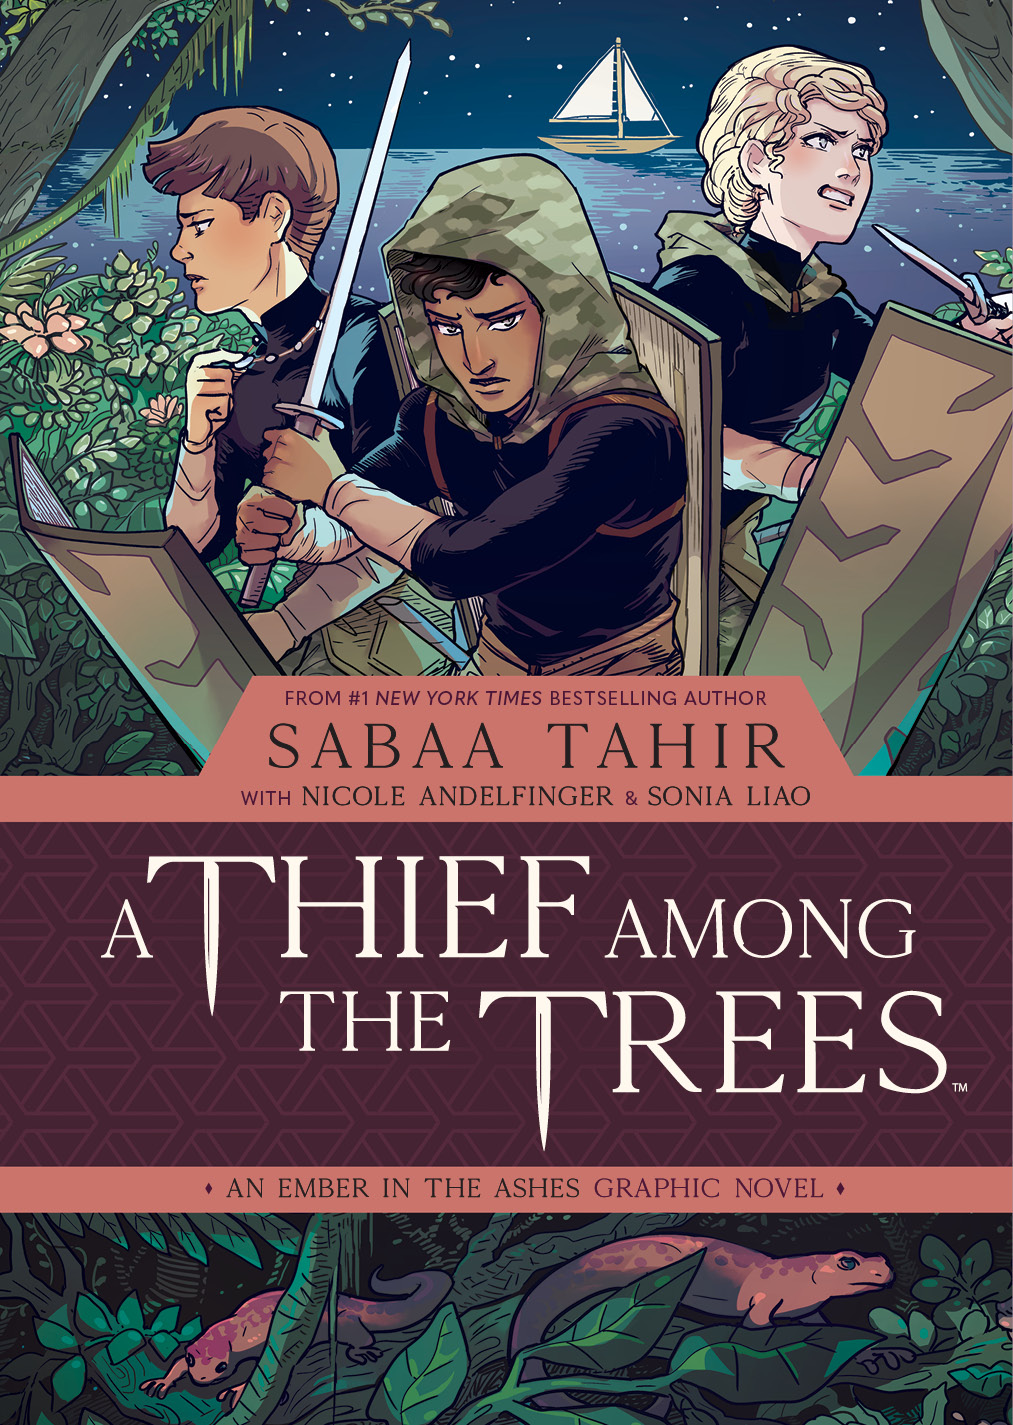 EmberAshes_ThiefAmongTrees_HC_Cover_Main